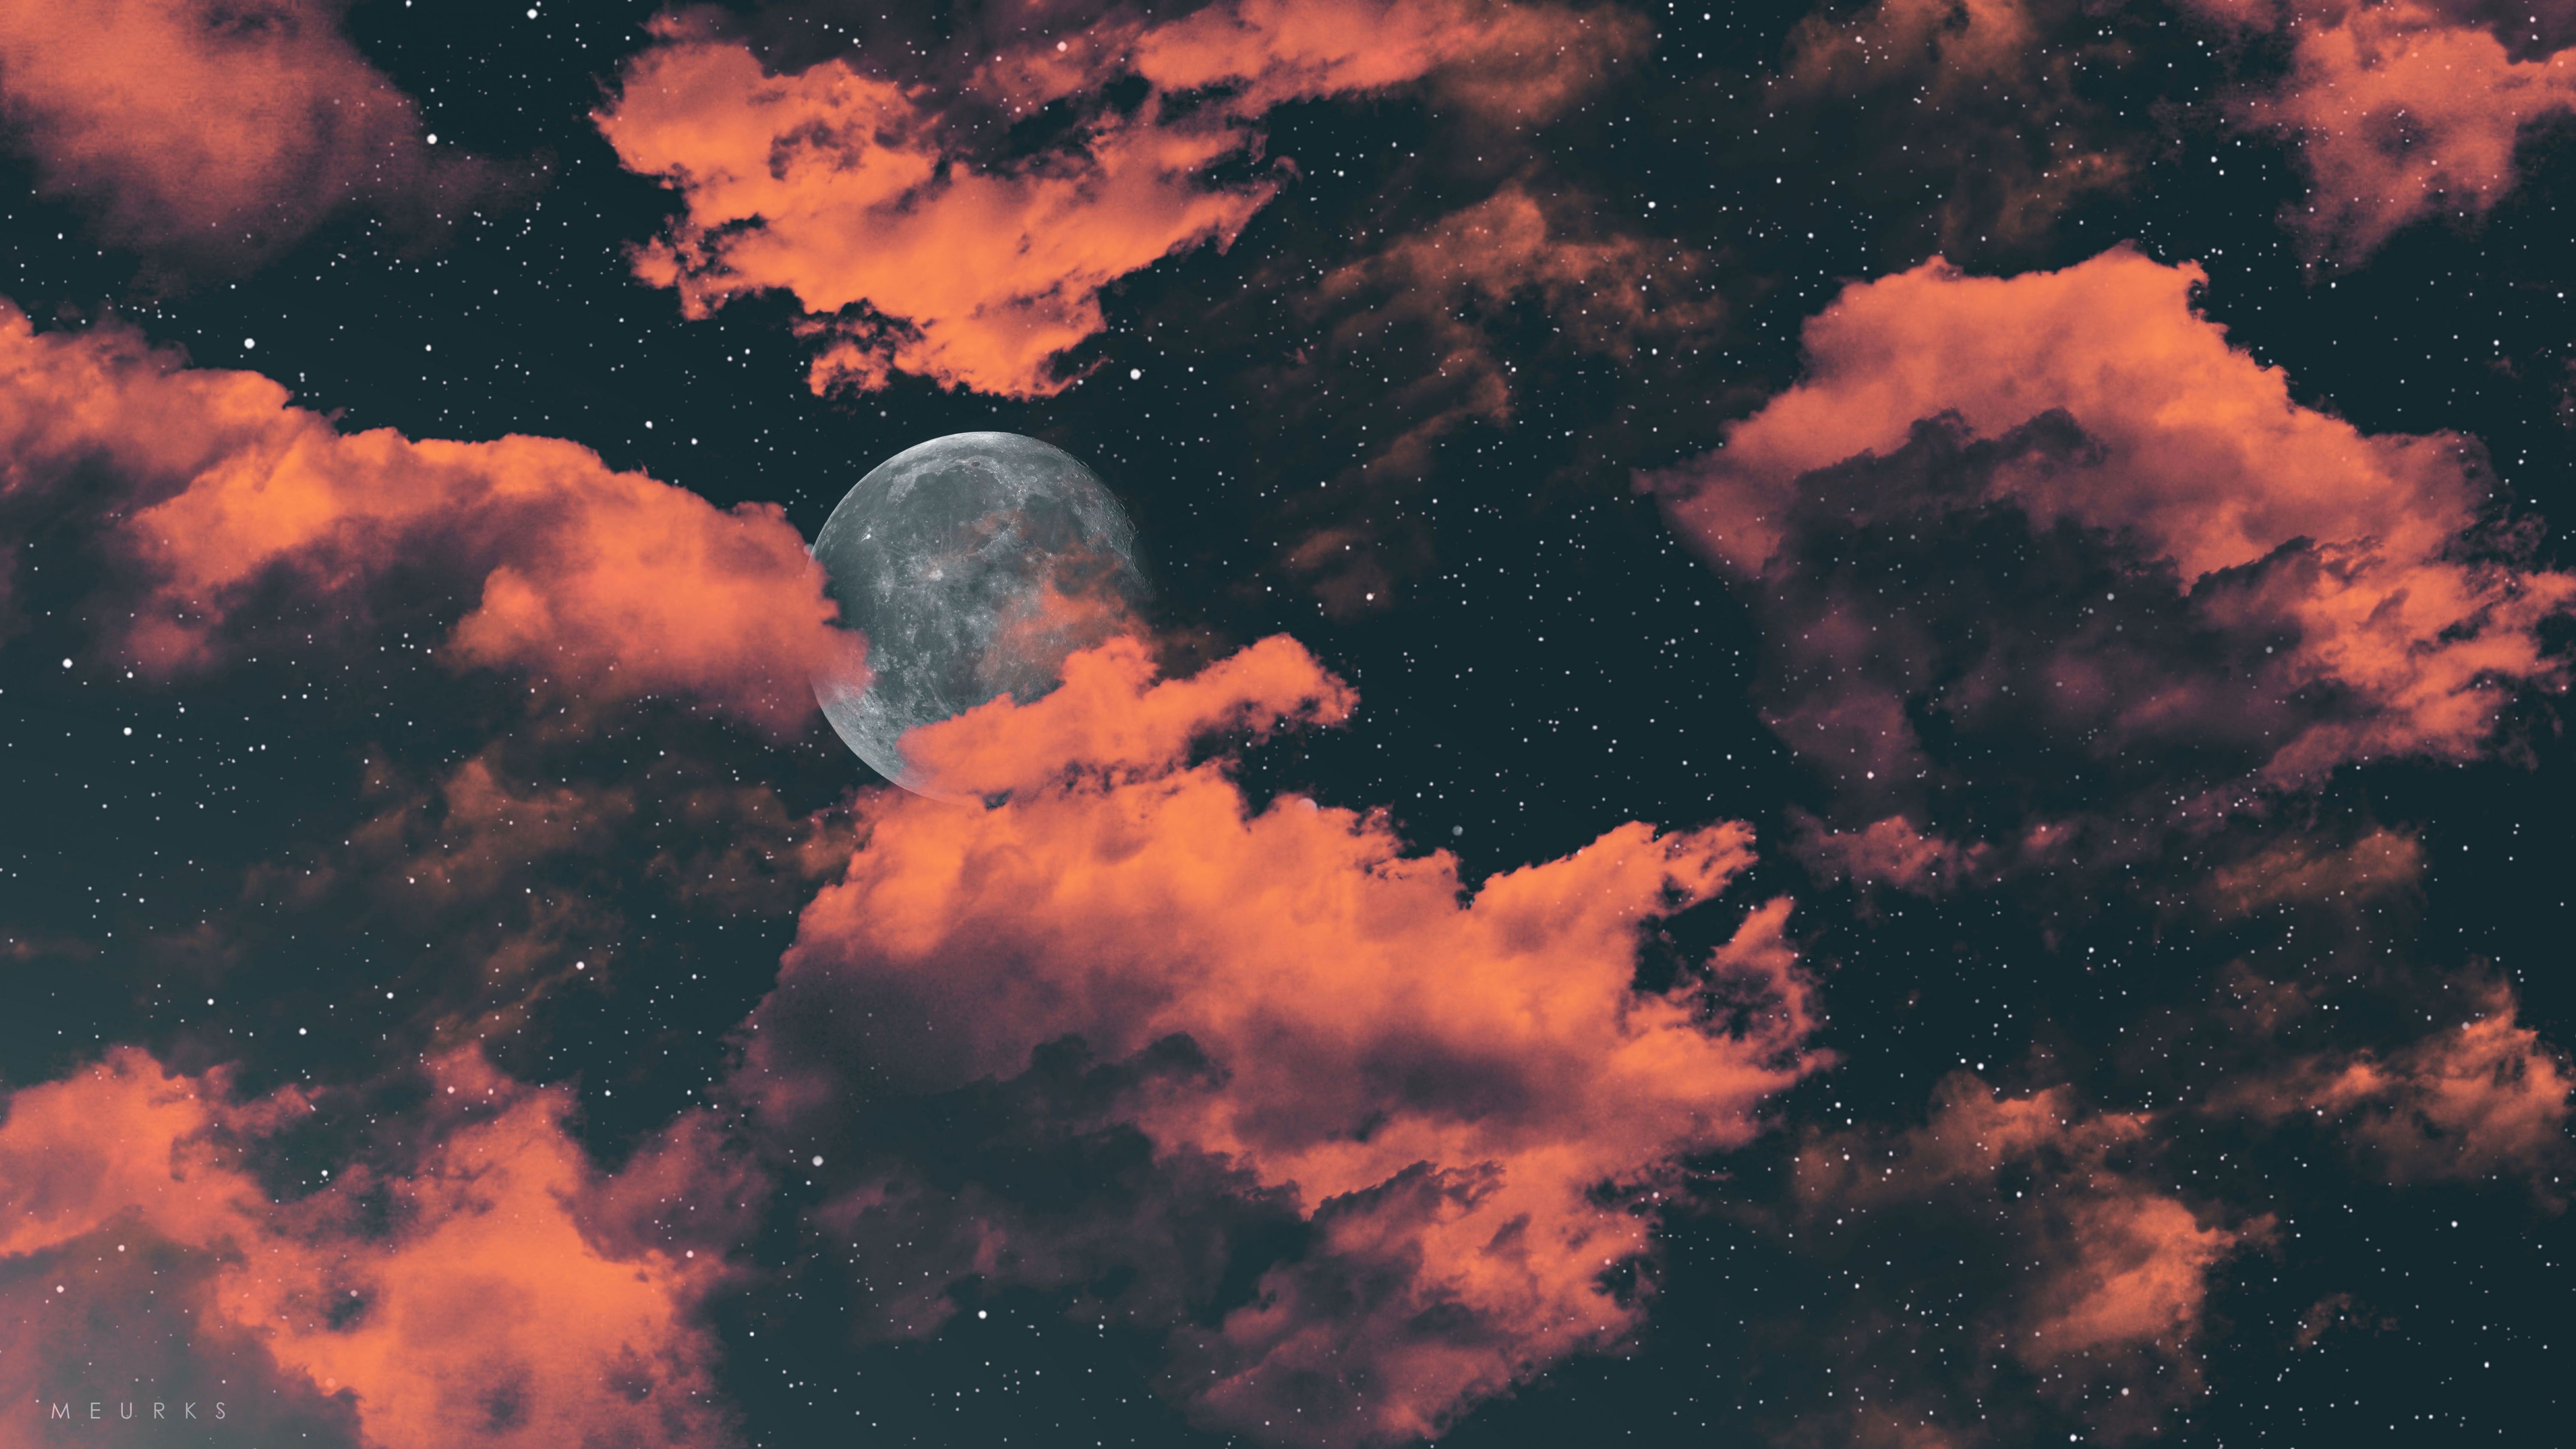 A moon is in the sky with clouds - Moon, dark orange